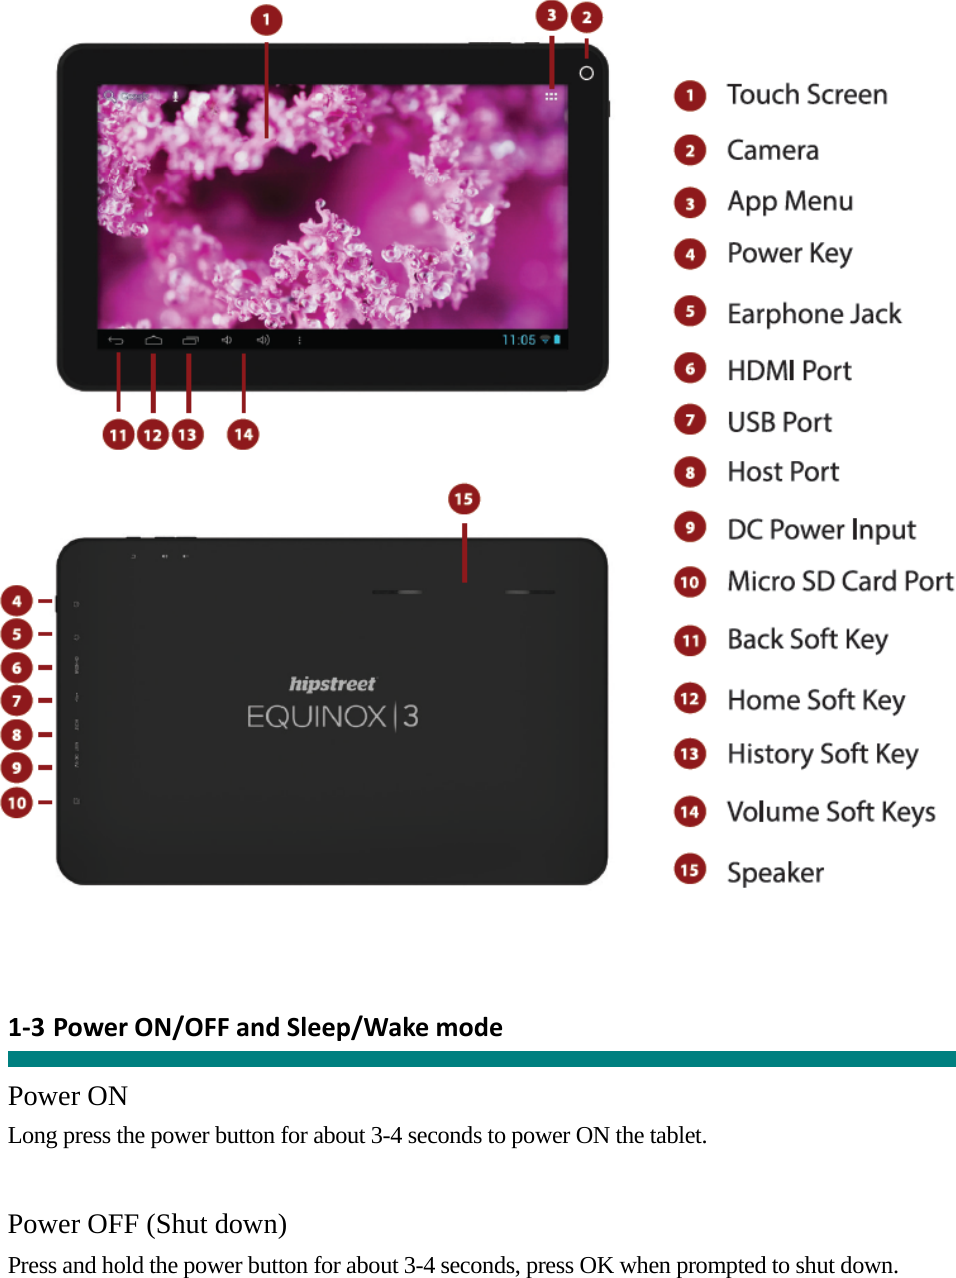      1‐3 PowerON/OFFandSleep/Wakemode  Power ON Long press the power button for about 3-4 seconds to power ON the tablet.     Power OFF (Shut down)  Press and hold the power button for about 3-4 seconds, press OK when prompted to shut down.   